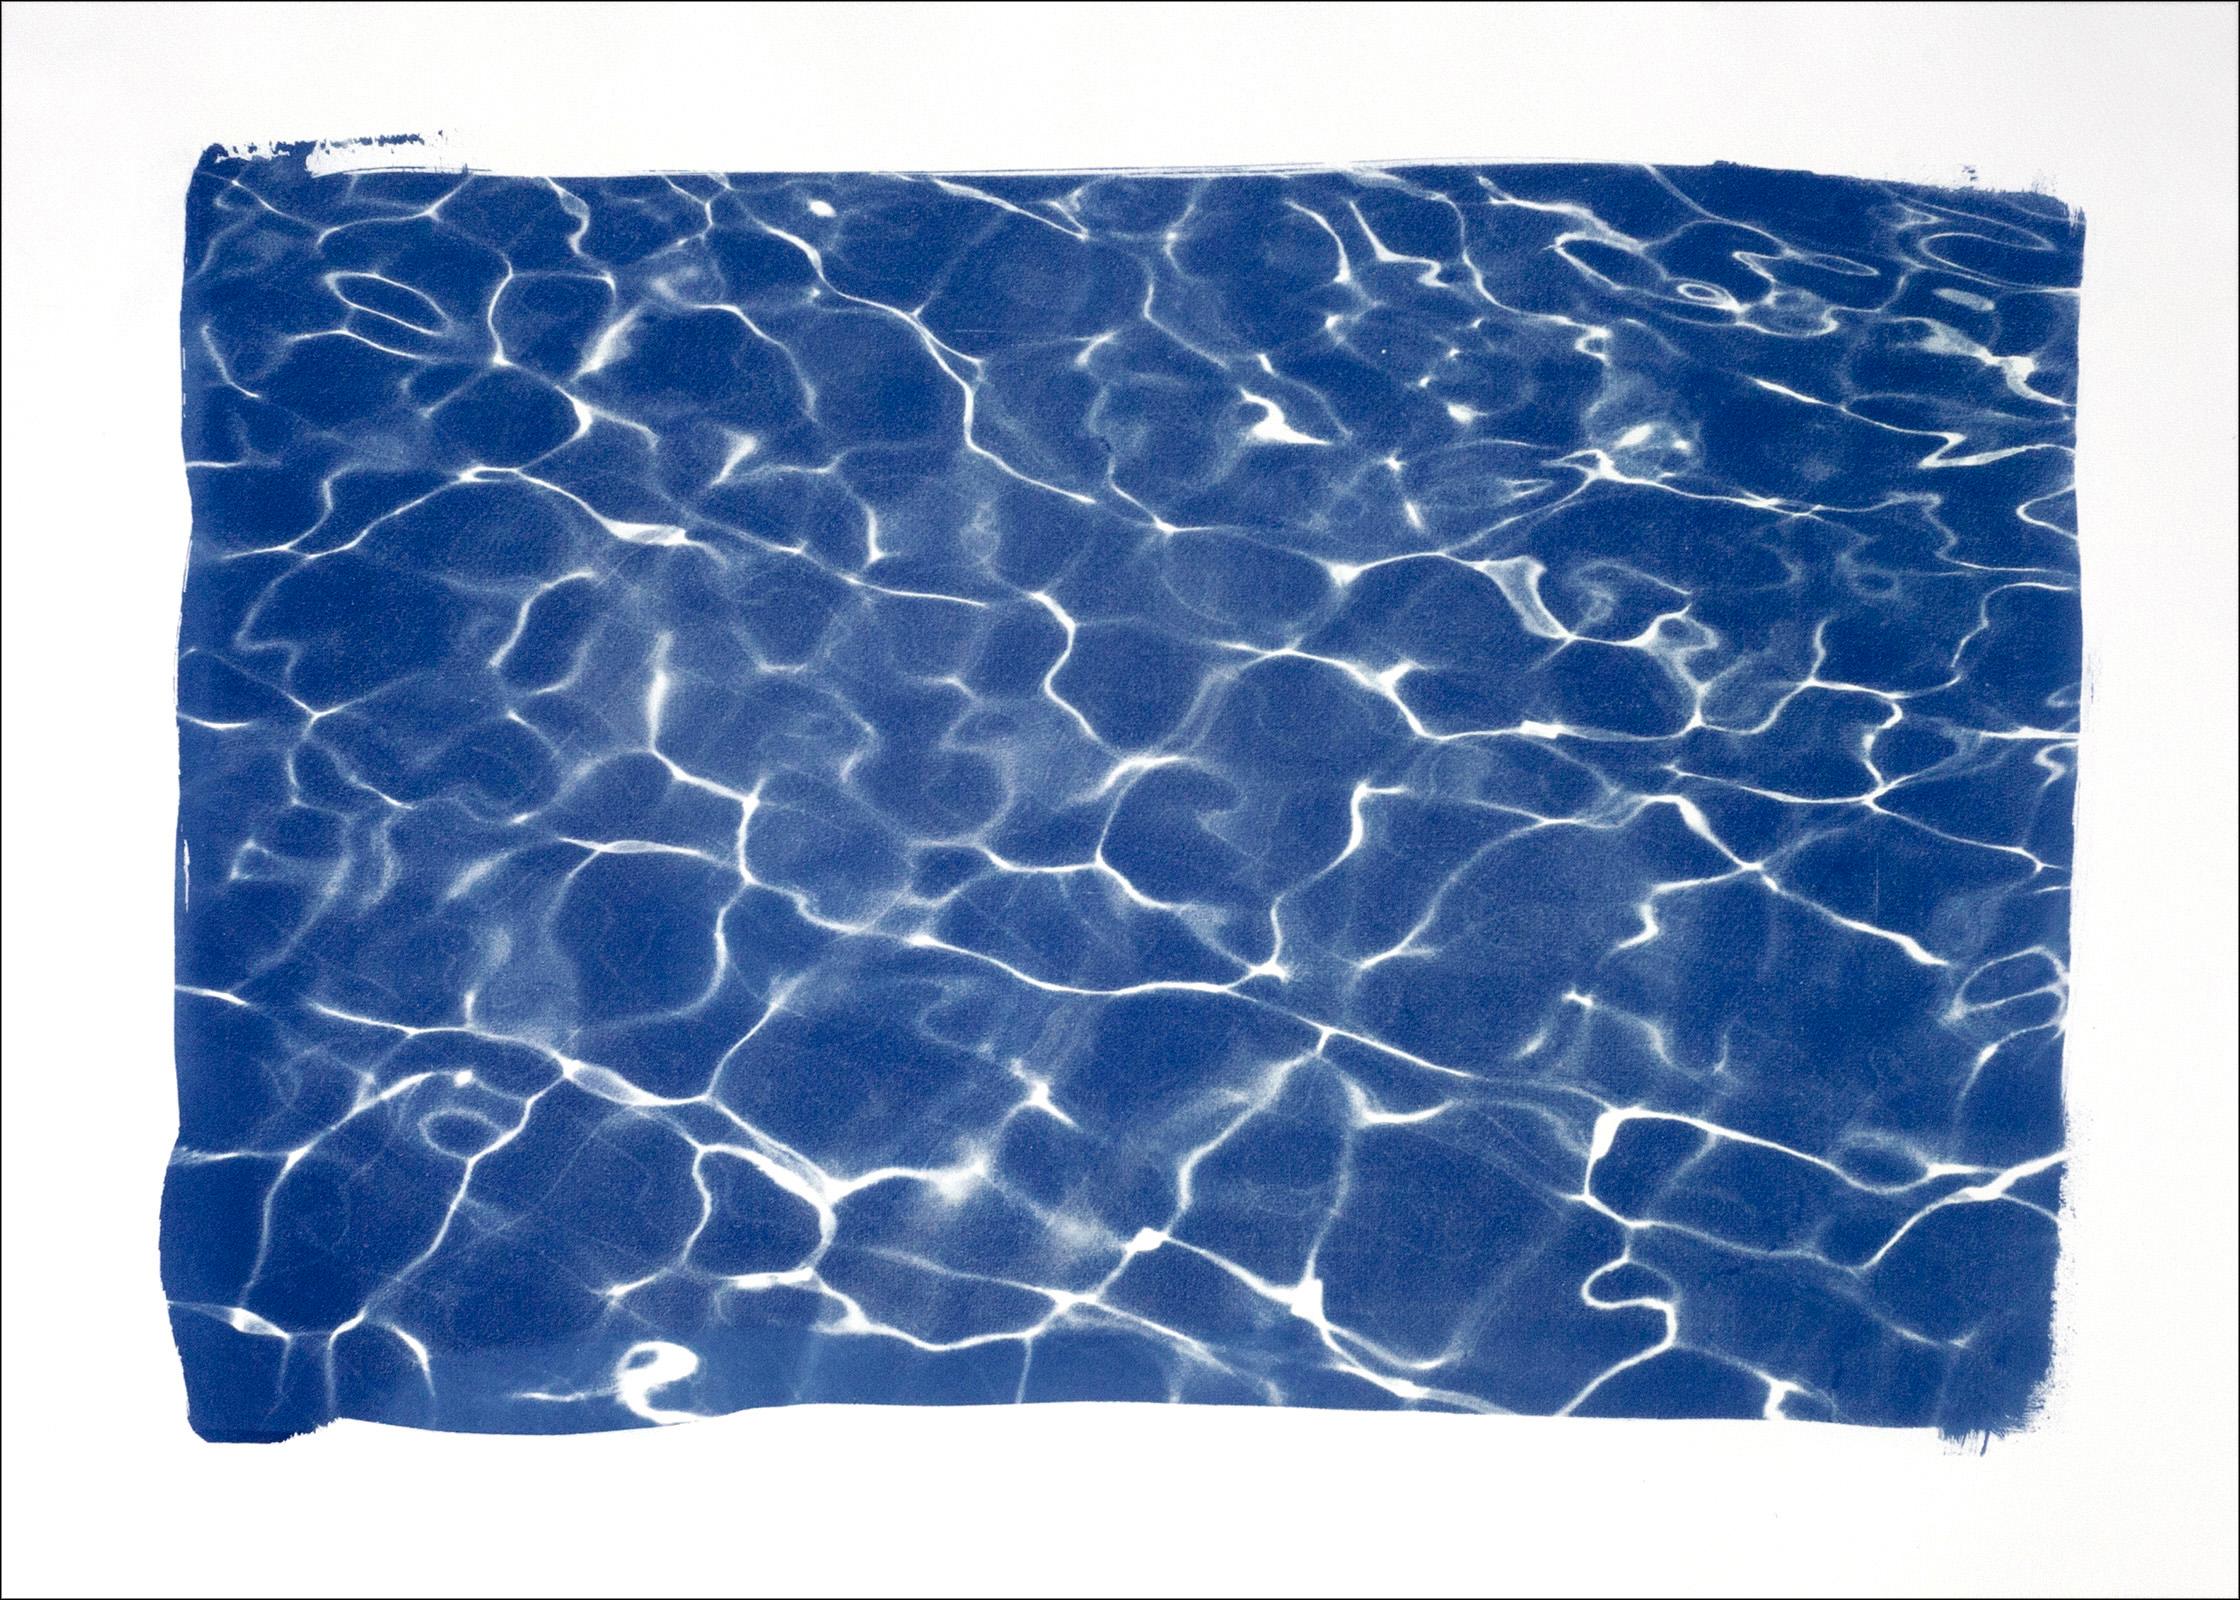 Kind of Cyan Abstract Drawing - Hollywood Pool House Glow, Cyanotype on Watercolor Paper, 100x70cm, Deep Blue